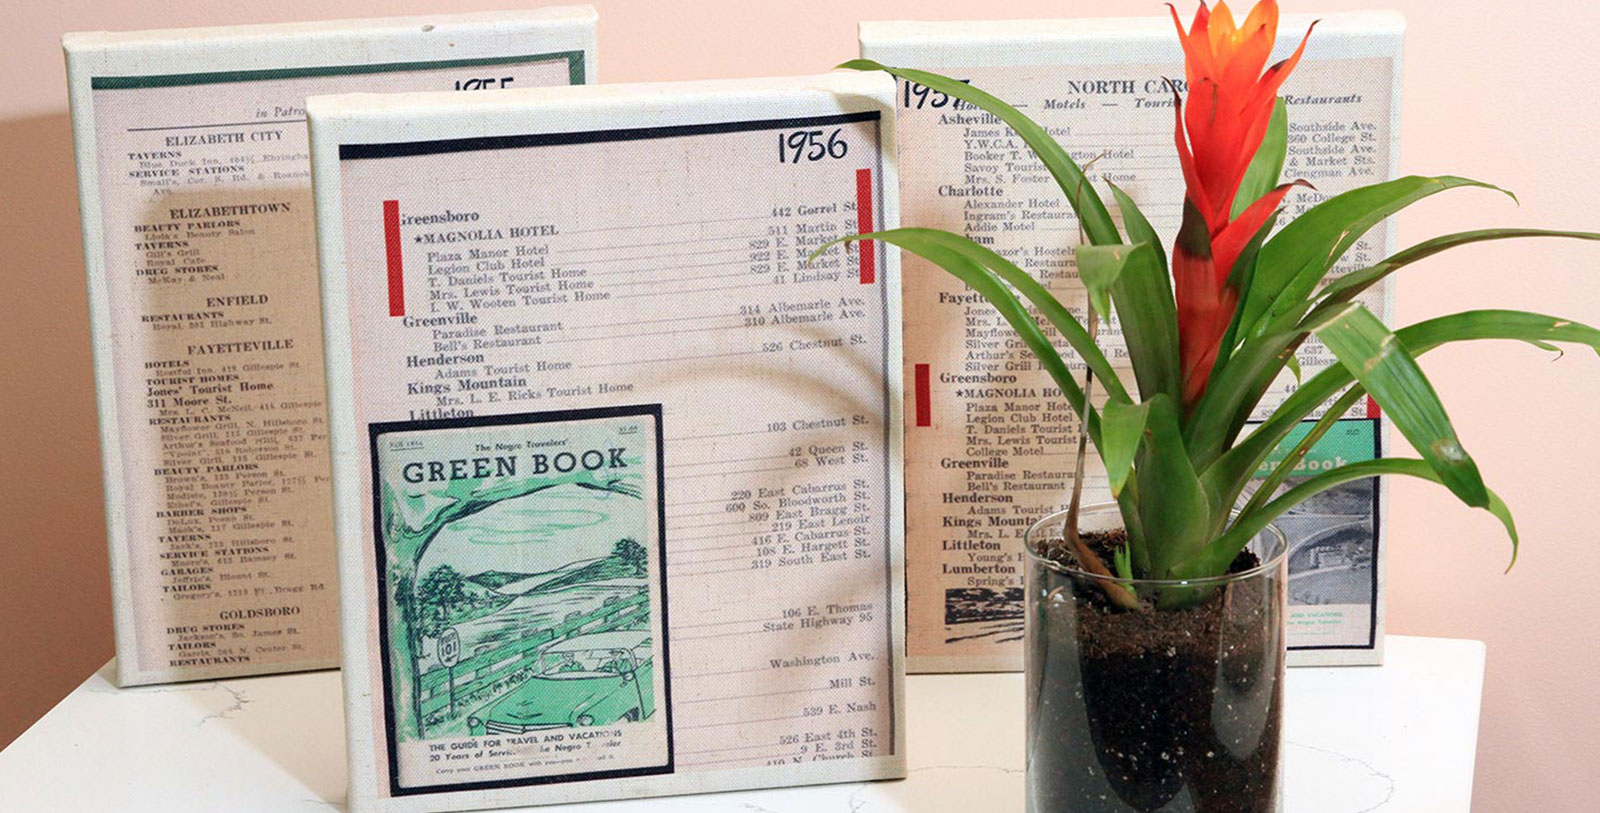 Discover the history of the Green Book and The Historic Magnolia House.